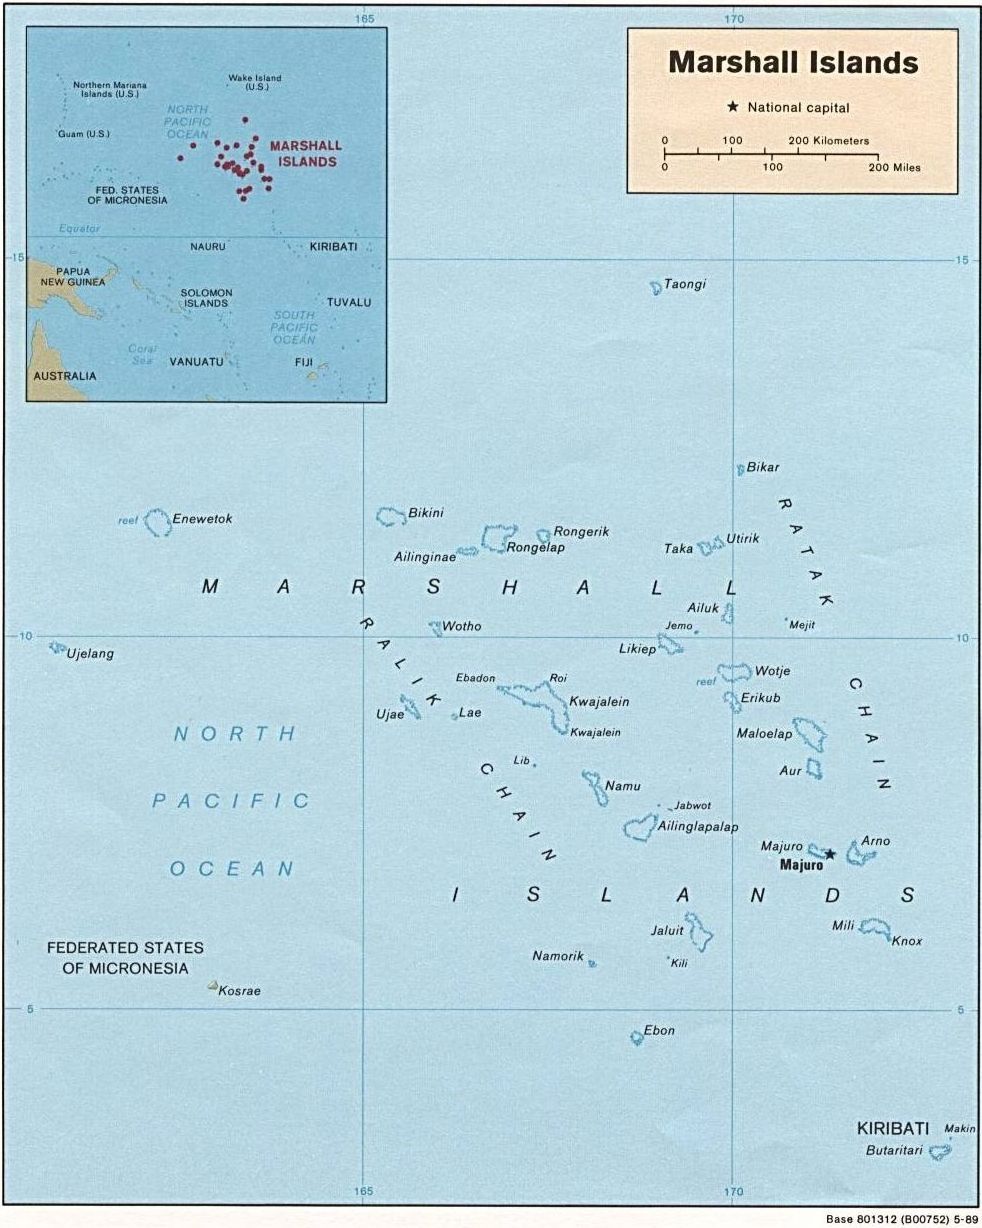 Map of the Republic of the Marshall Islands (Political), 1989. Courtesy of, The World Factbook (http://cia.gov/cia/publications/factbook) or CIA Maps and Publications Released to the Public (http://www.cia.gov/cia/publications/mapspub), Central Intelligence Agency (CIA), Government of the United States of America (USA); and the Perry-Castaeda Map Collection (http://www.lib.utexas.edu/maps), Perry-Castaeda Library, The General Libraries, University of Texas at Austin, Austin, Texas, USA.